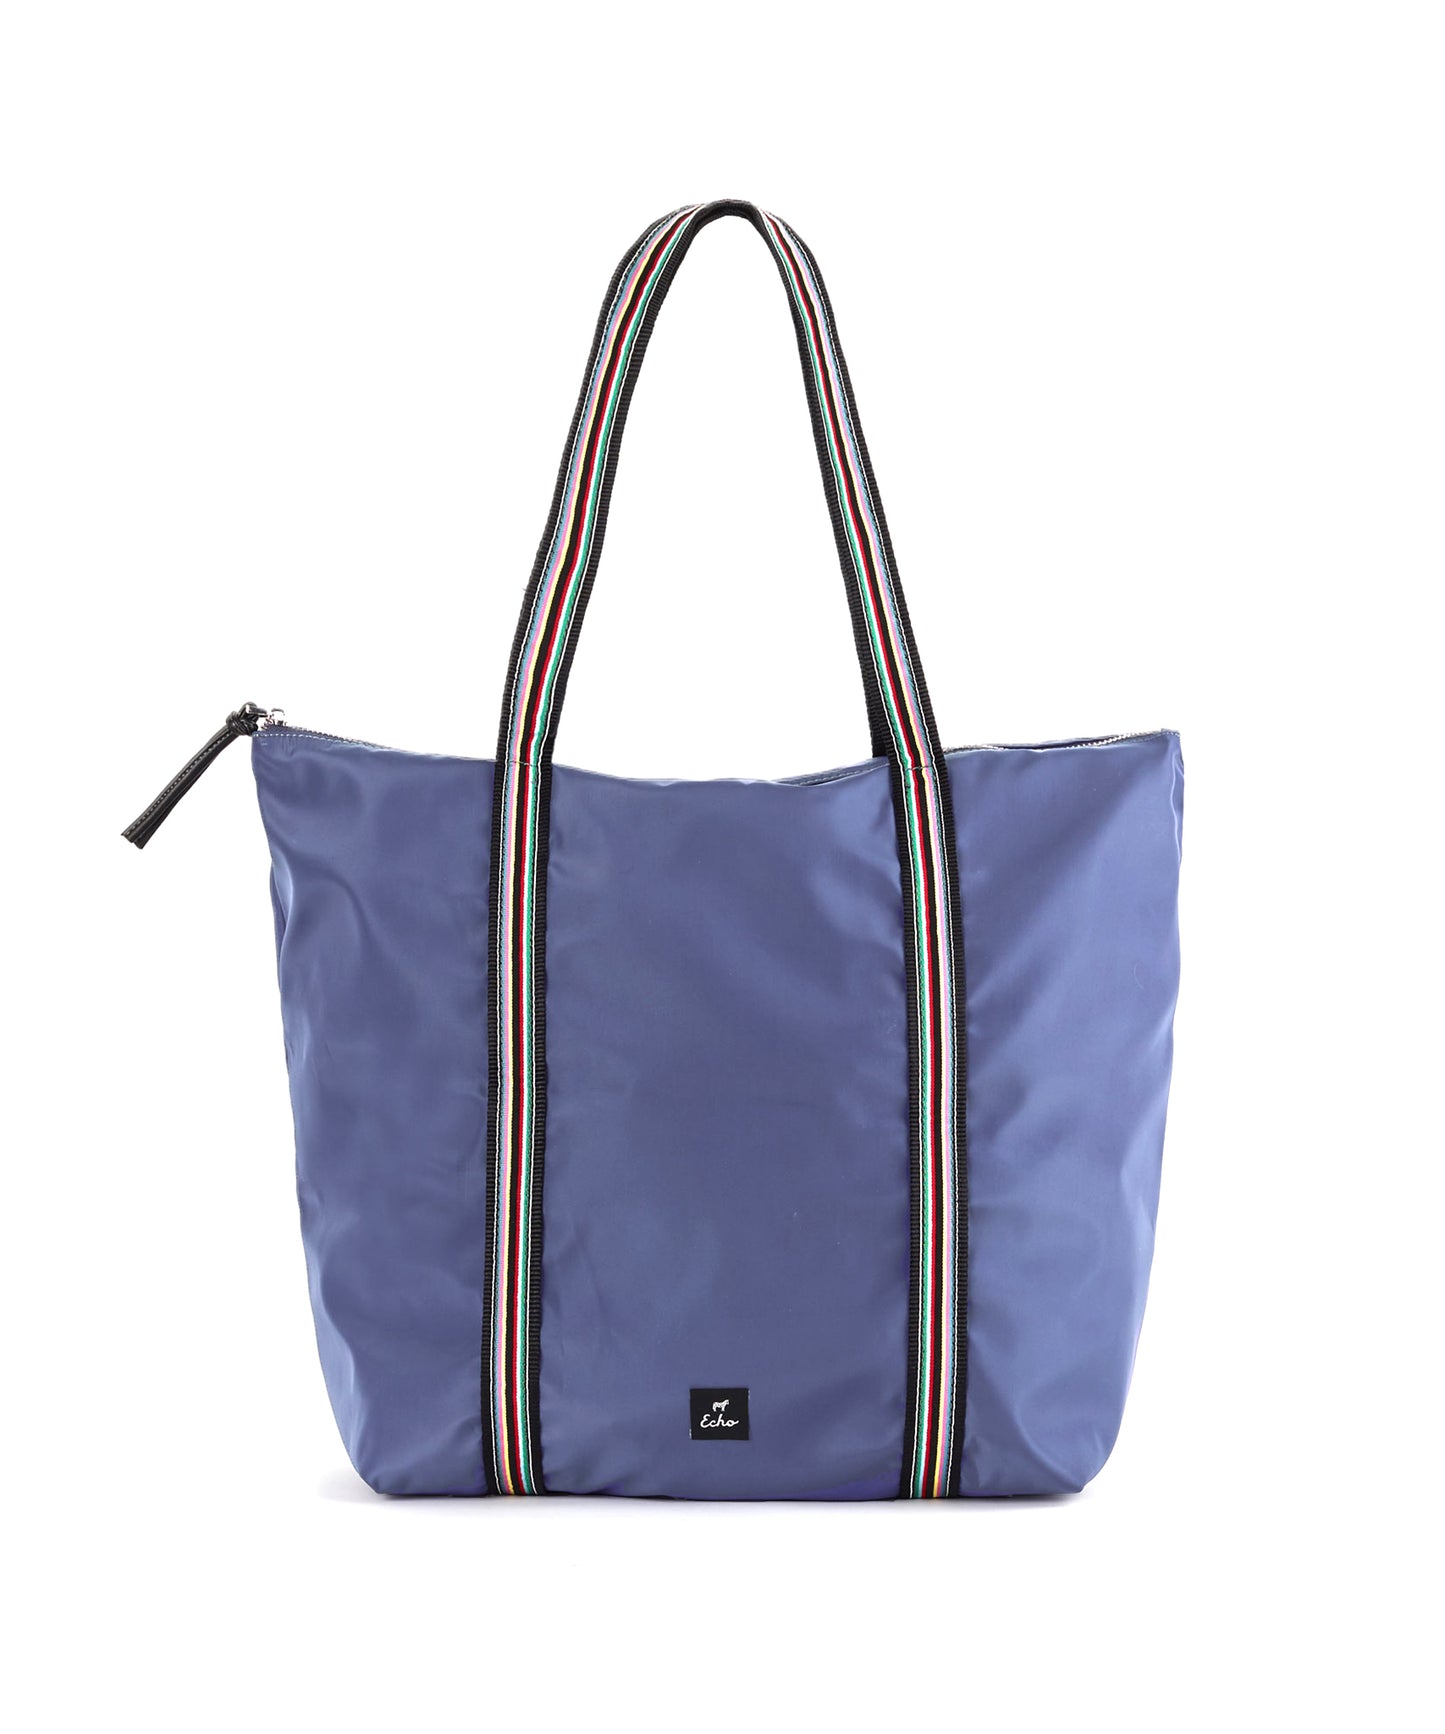 London Tote in color Chambray